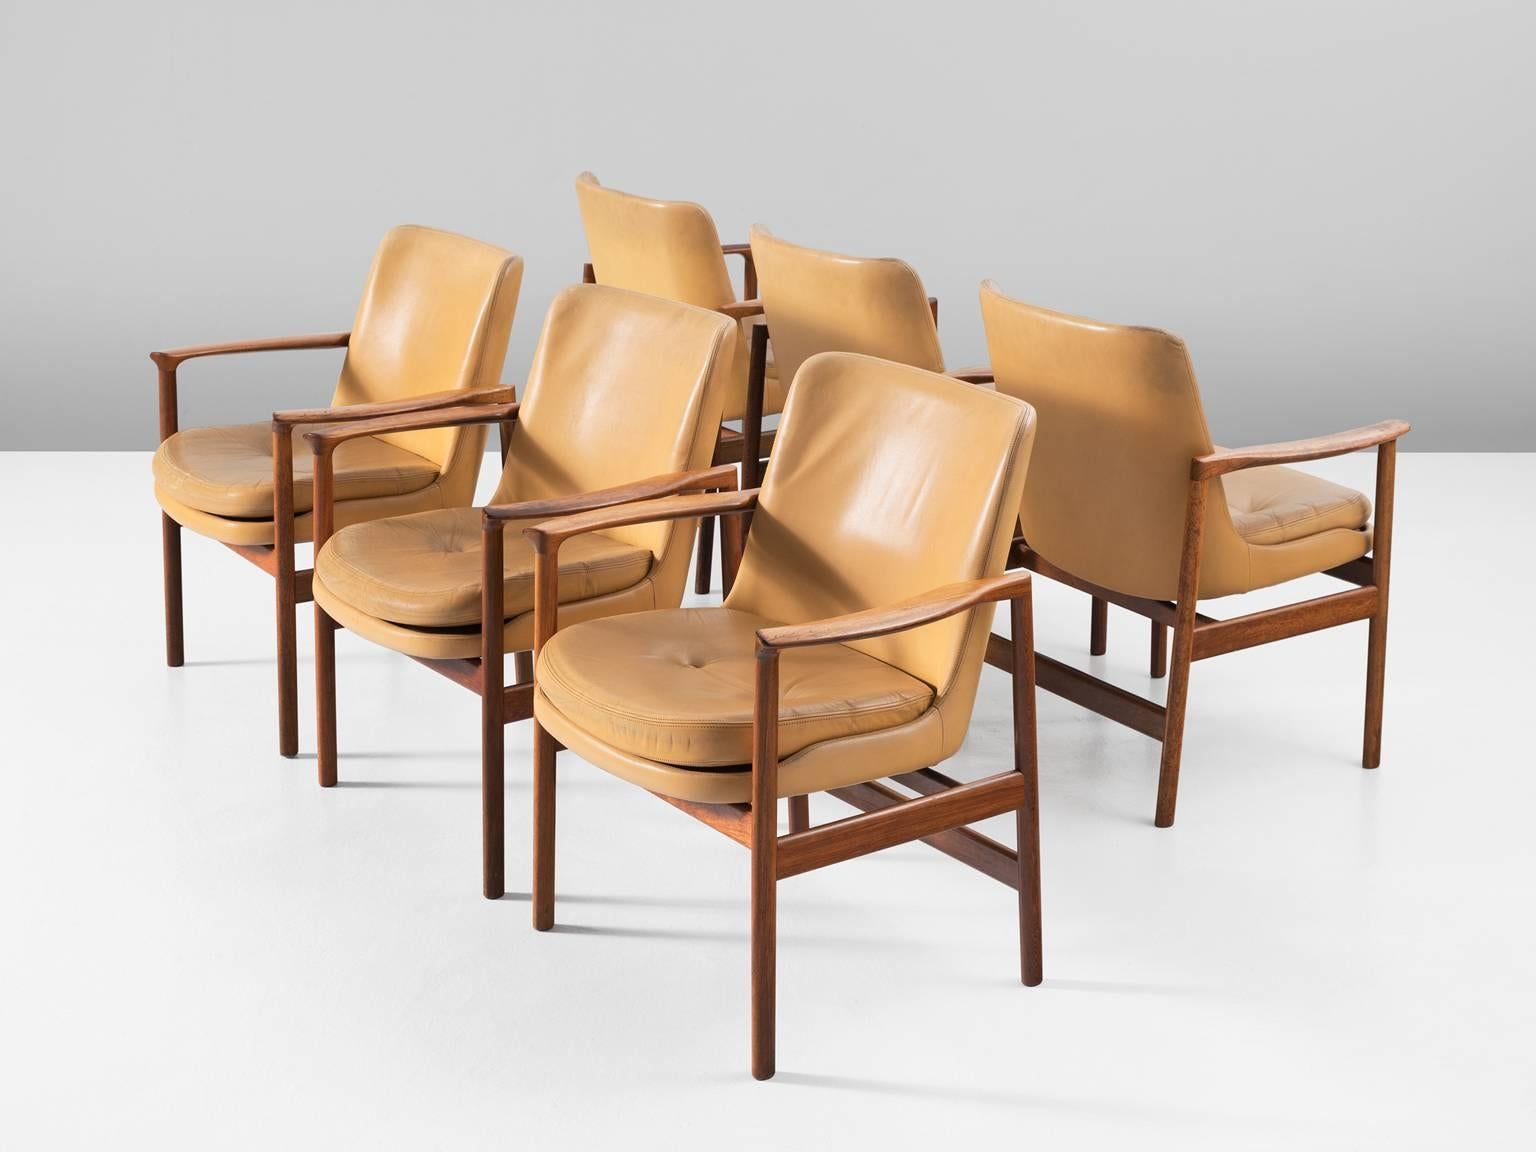 Set of six armchairs, in rosewood and leather by Ib Kofod-Larsen, Denmark, 1950s. 

Set of six elegant conference chairs by Danish designer Ib Kofod-Larsen. These dining chairs have the characteristics of the iconic Elizabeth chair of